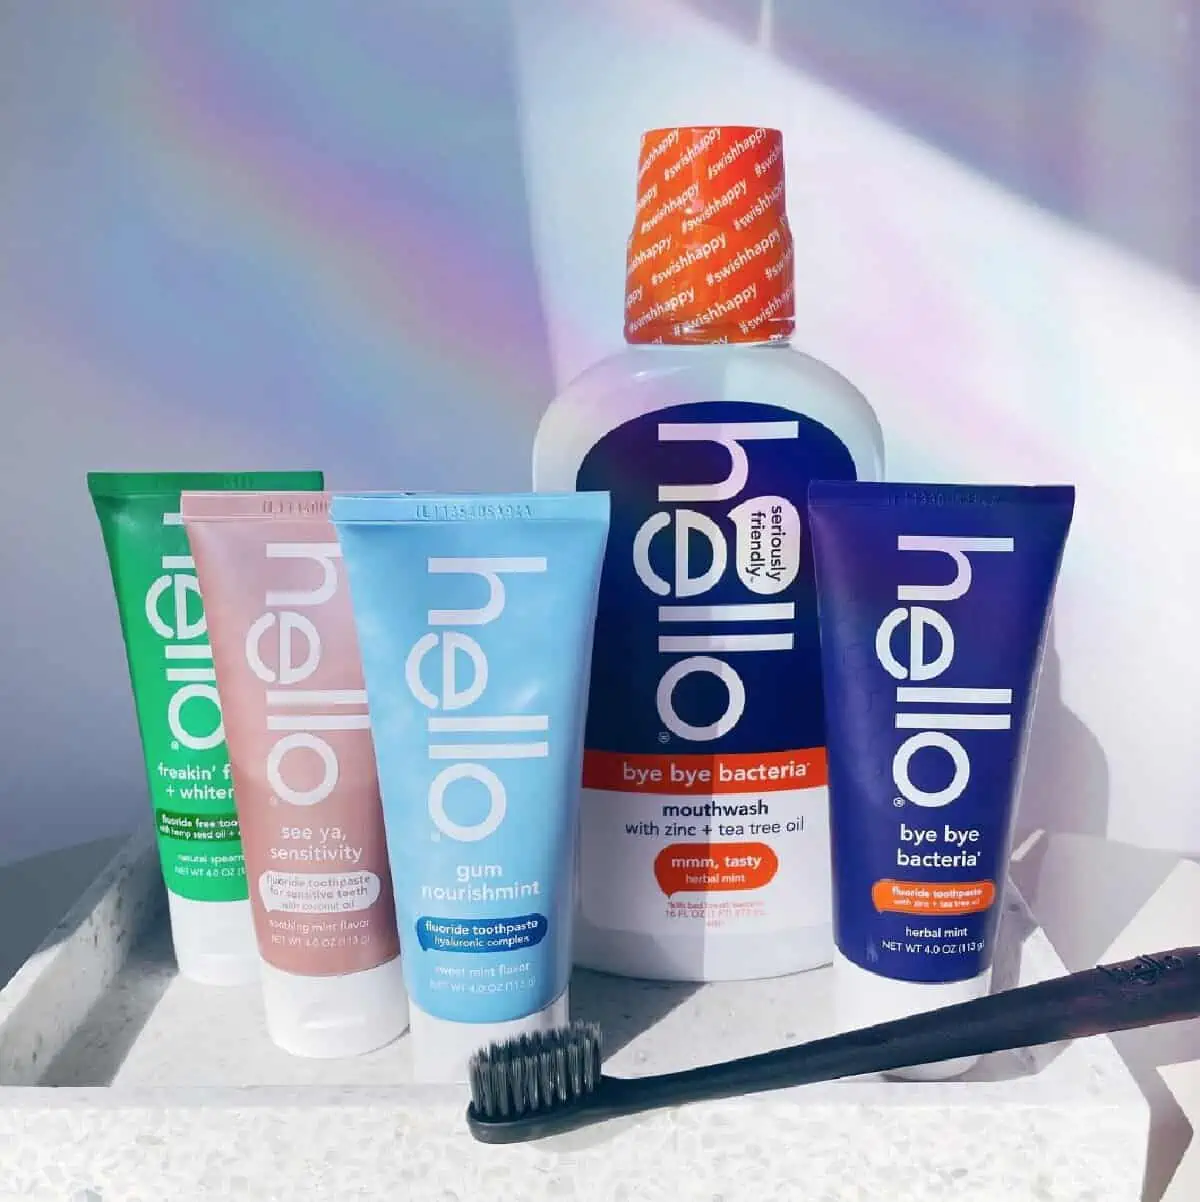 Four Hello toothpaste tubes, a bottle of Hello mouthwash and a black toothbrush against a rainbow-splashed white background. 